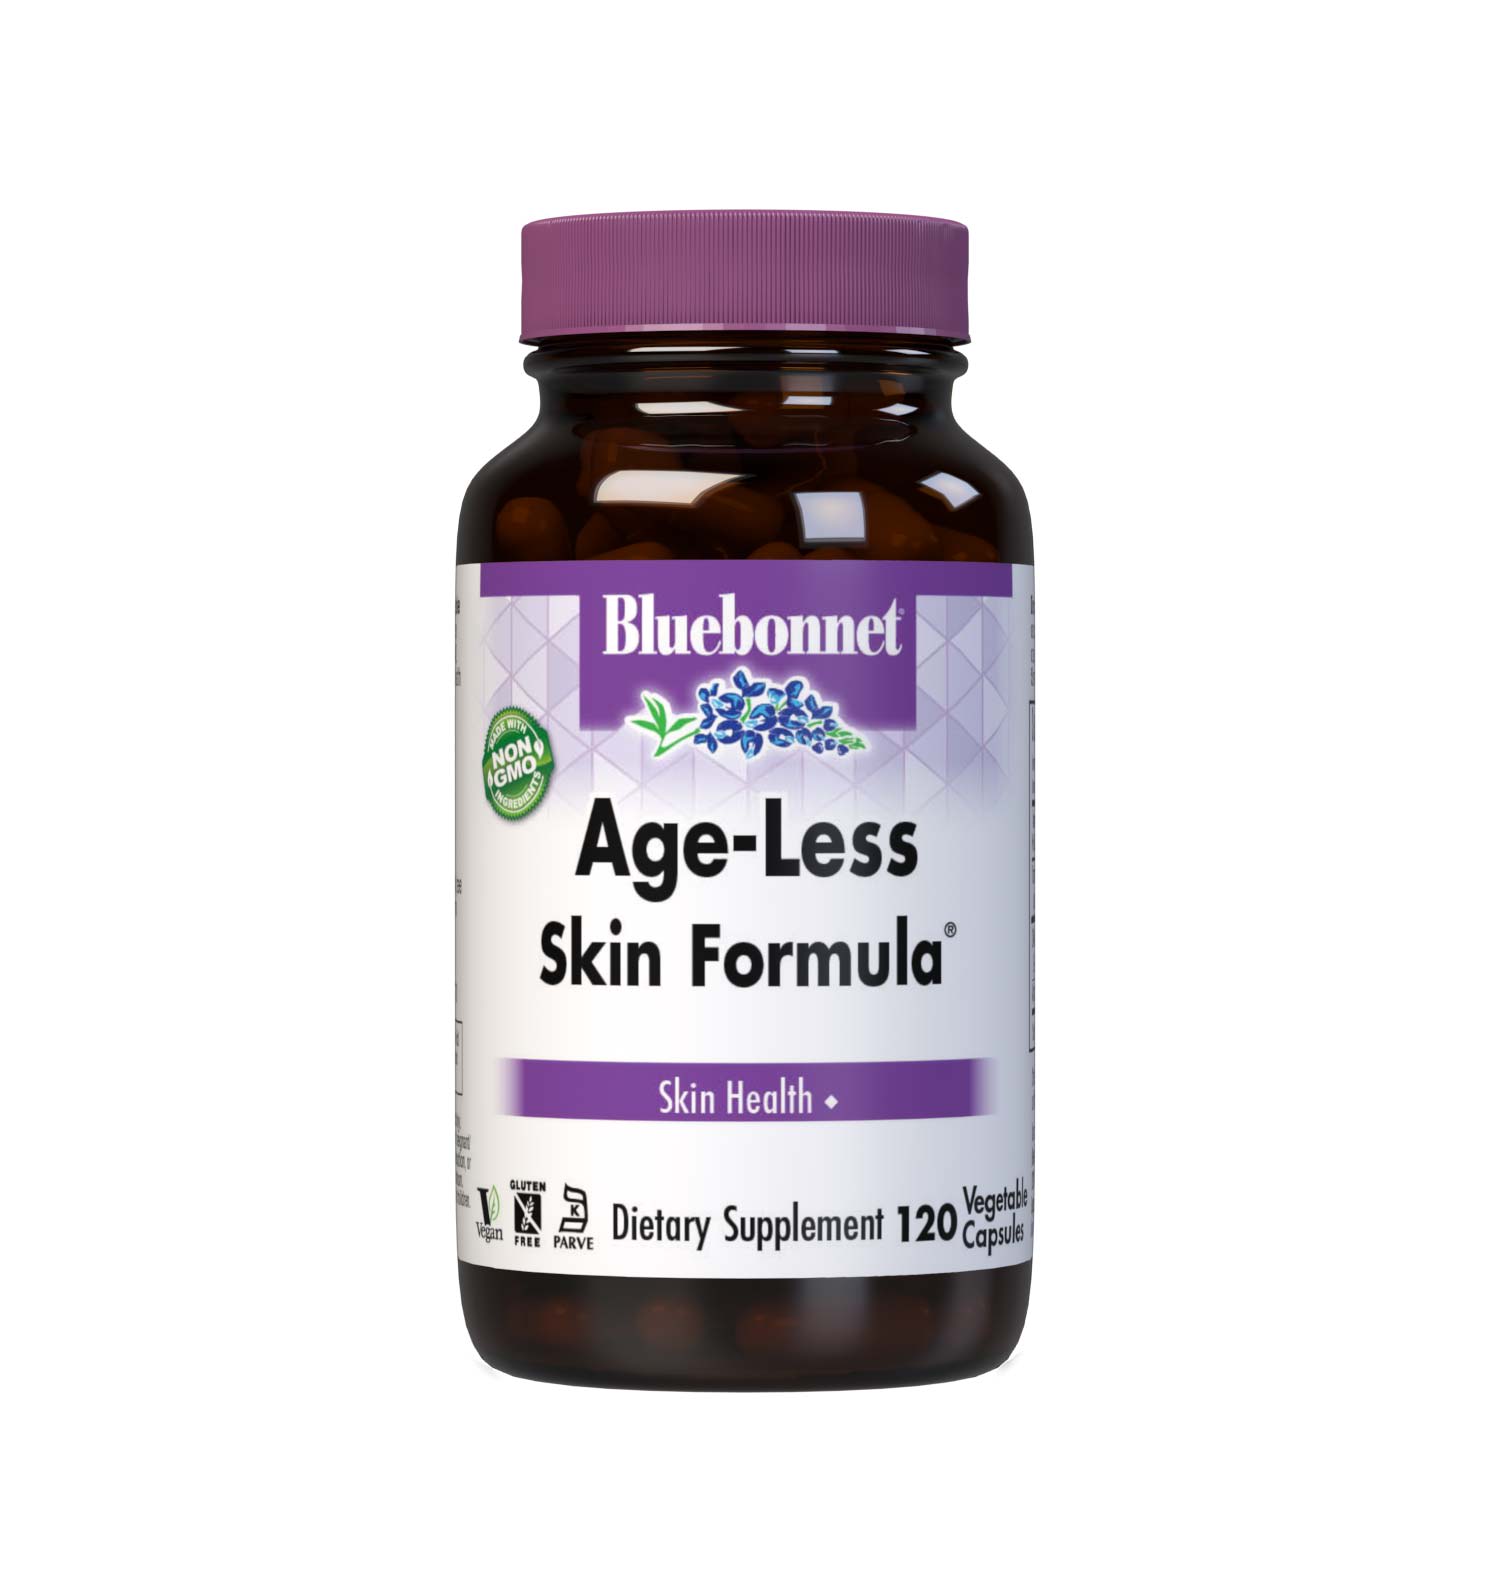 Bluebonnet’s Age-Less Skin Formula 120 Vegetable Capsules are formulated with a combination of vitamin C from ascorbyl palmitate, DMAE and alpha lipoic acid to help support skin health by boosting collagen production. #size_120 count